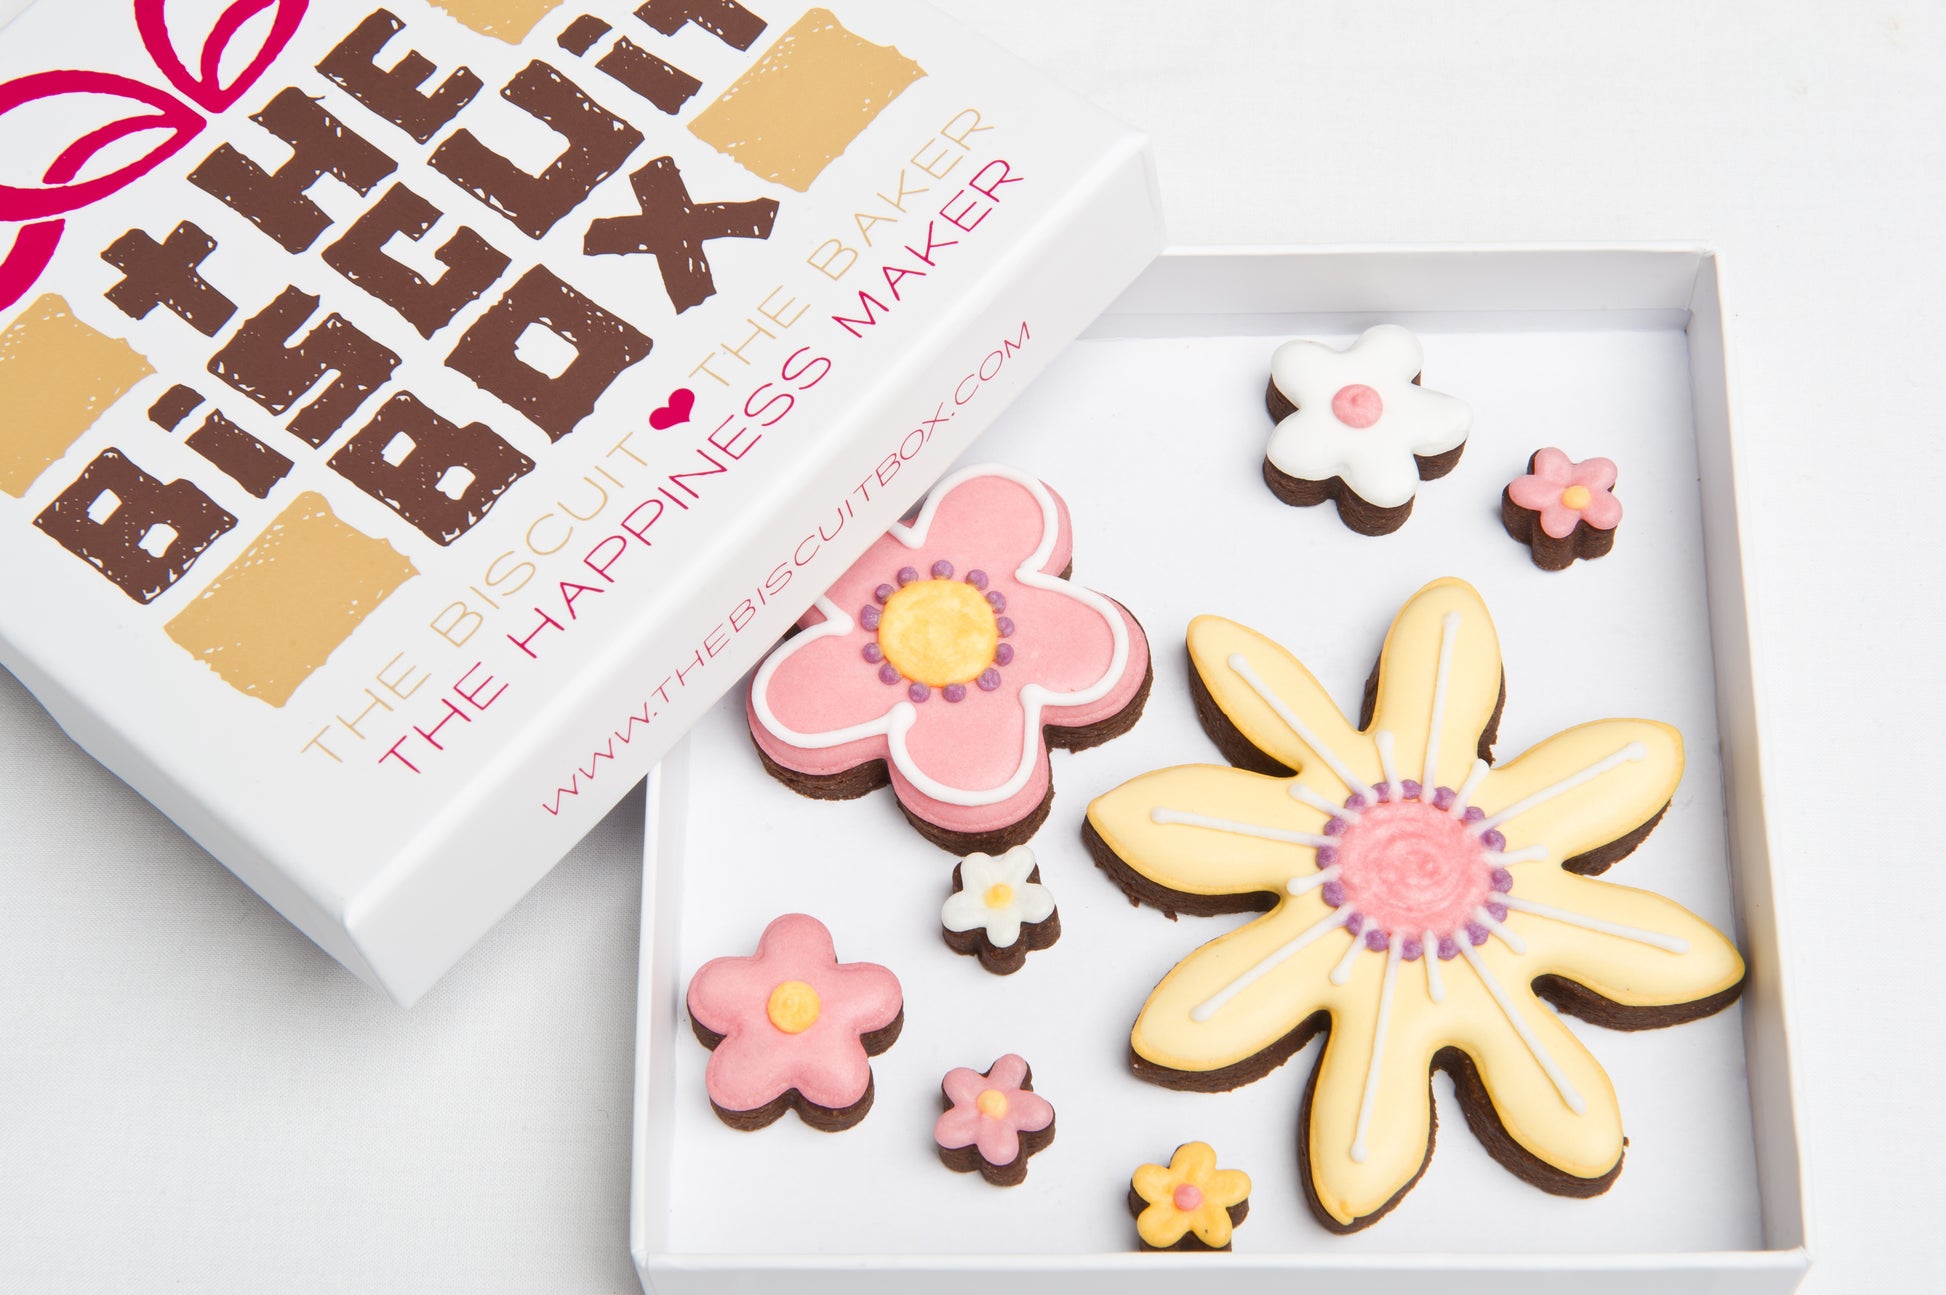 Flower cookies in a. box. Includes a yellow sunflower biscuit and a selection of colourful cookies in a. box.